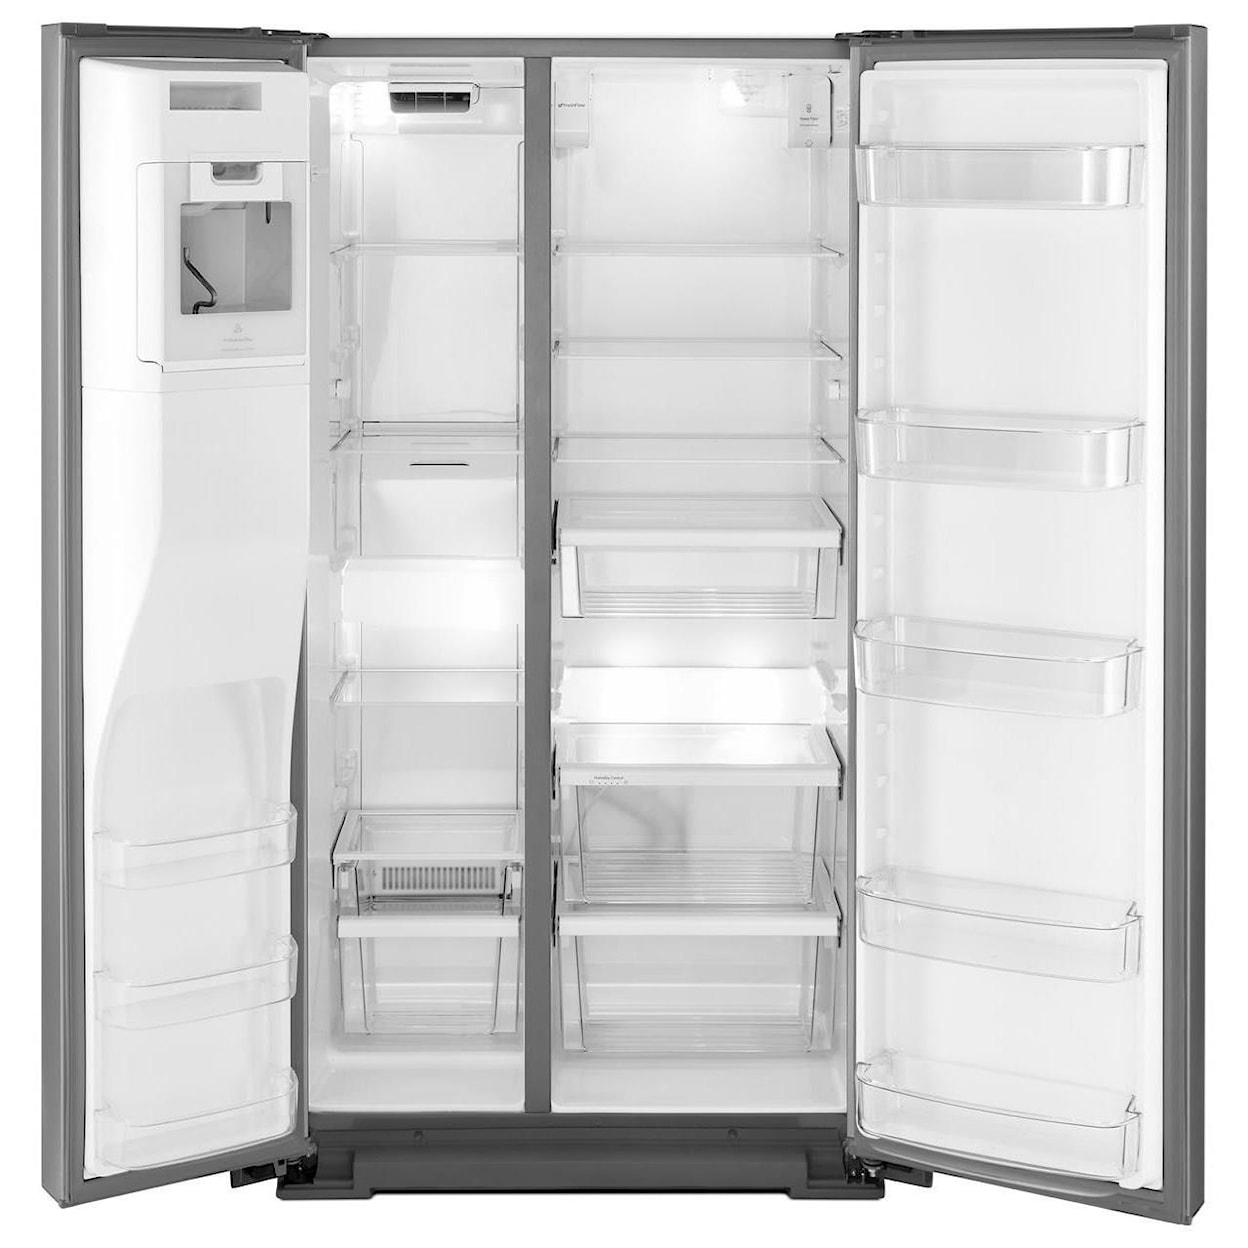 Whirlpool Side-By-Side Refrigerators 36" Contemporary Handle Counter Depth Fridge